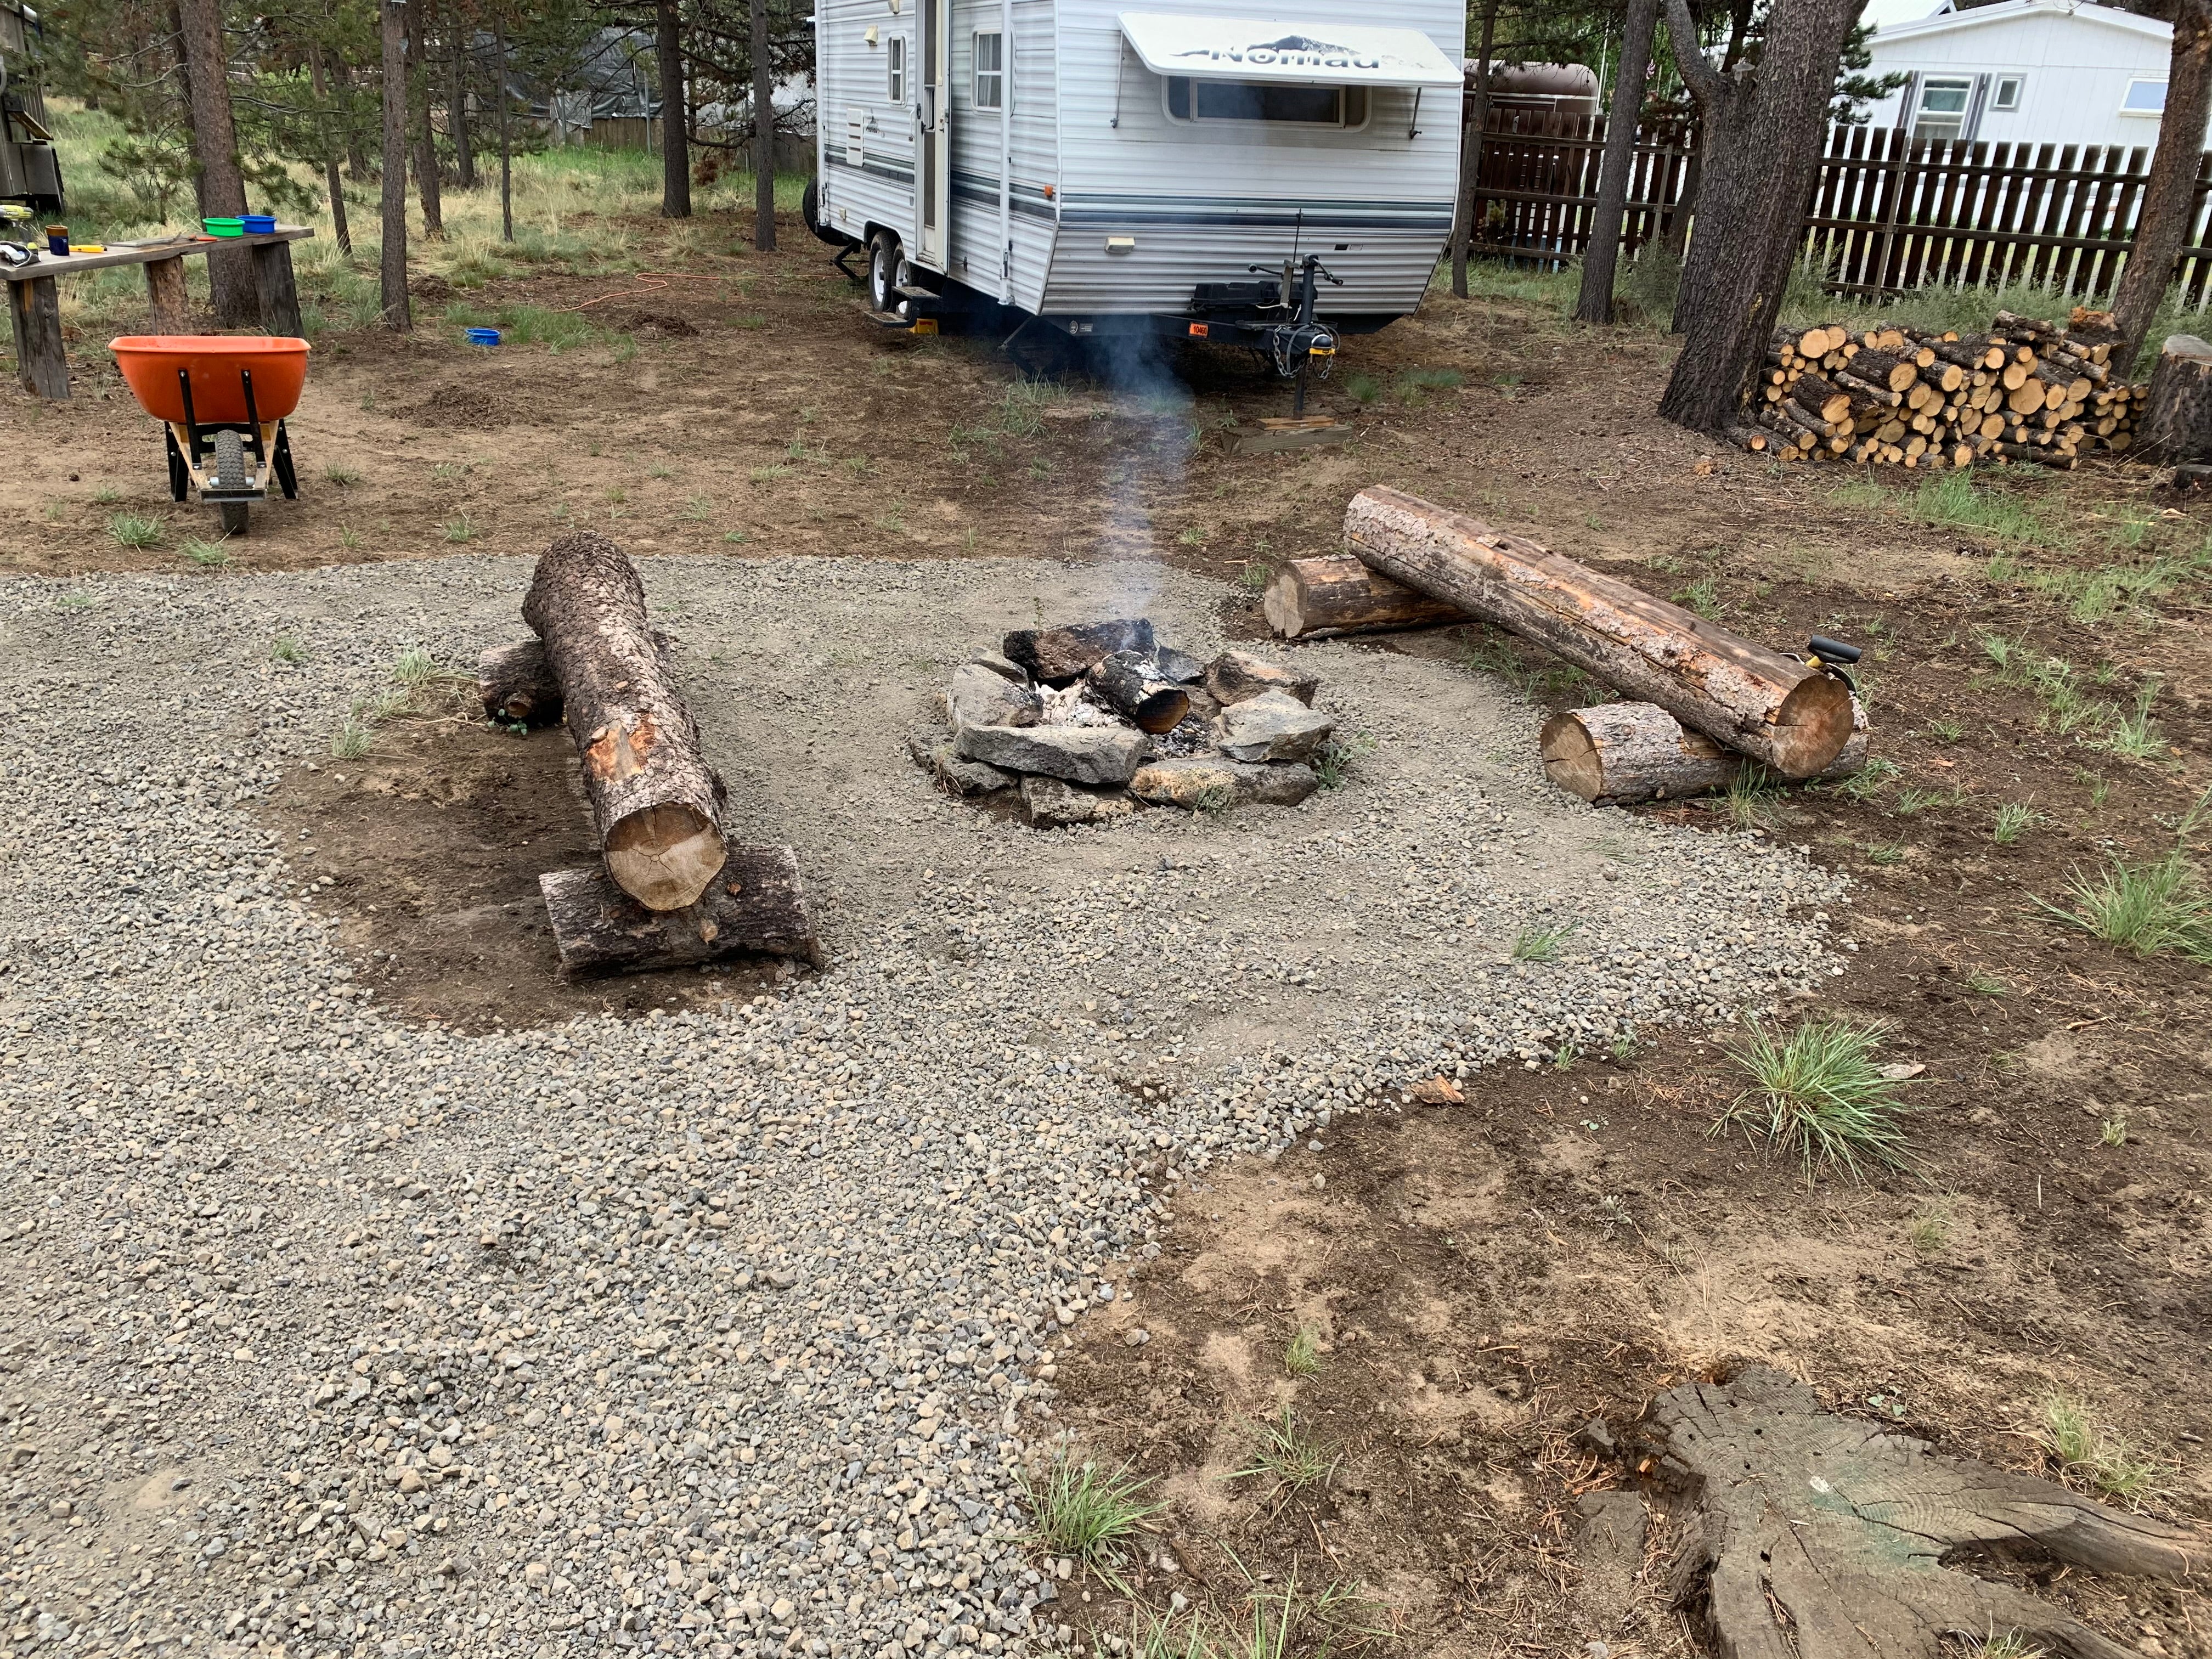 Camper submitted image from La Pine, Oregon - 1